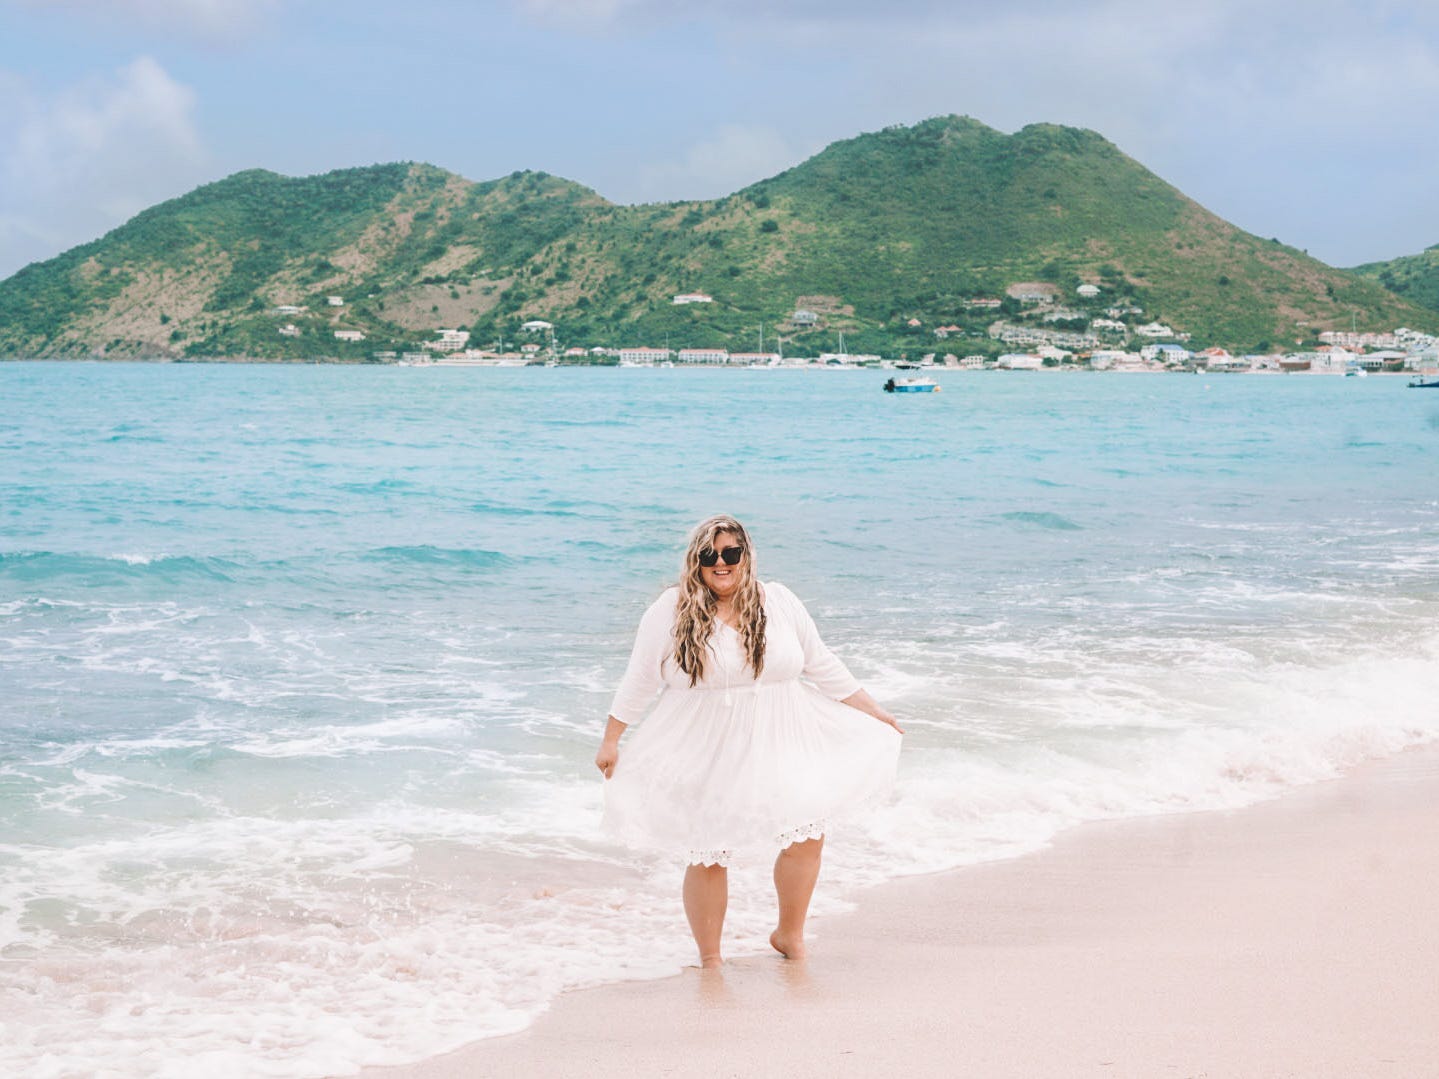 Halee Whiting on the beach in a white dress and sunglasses